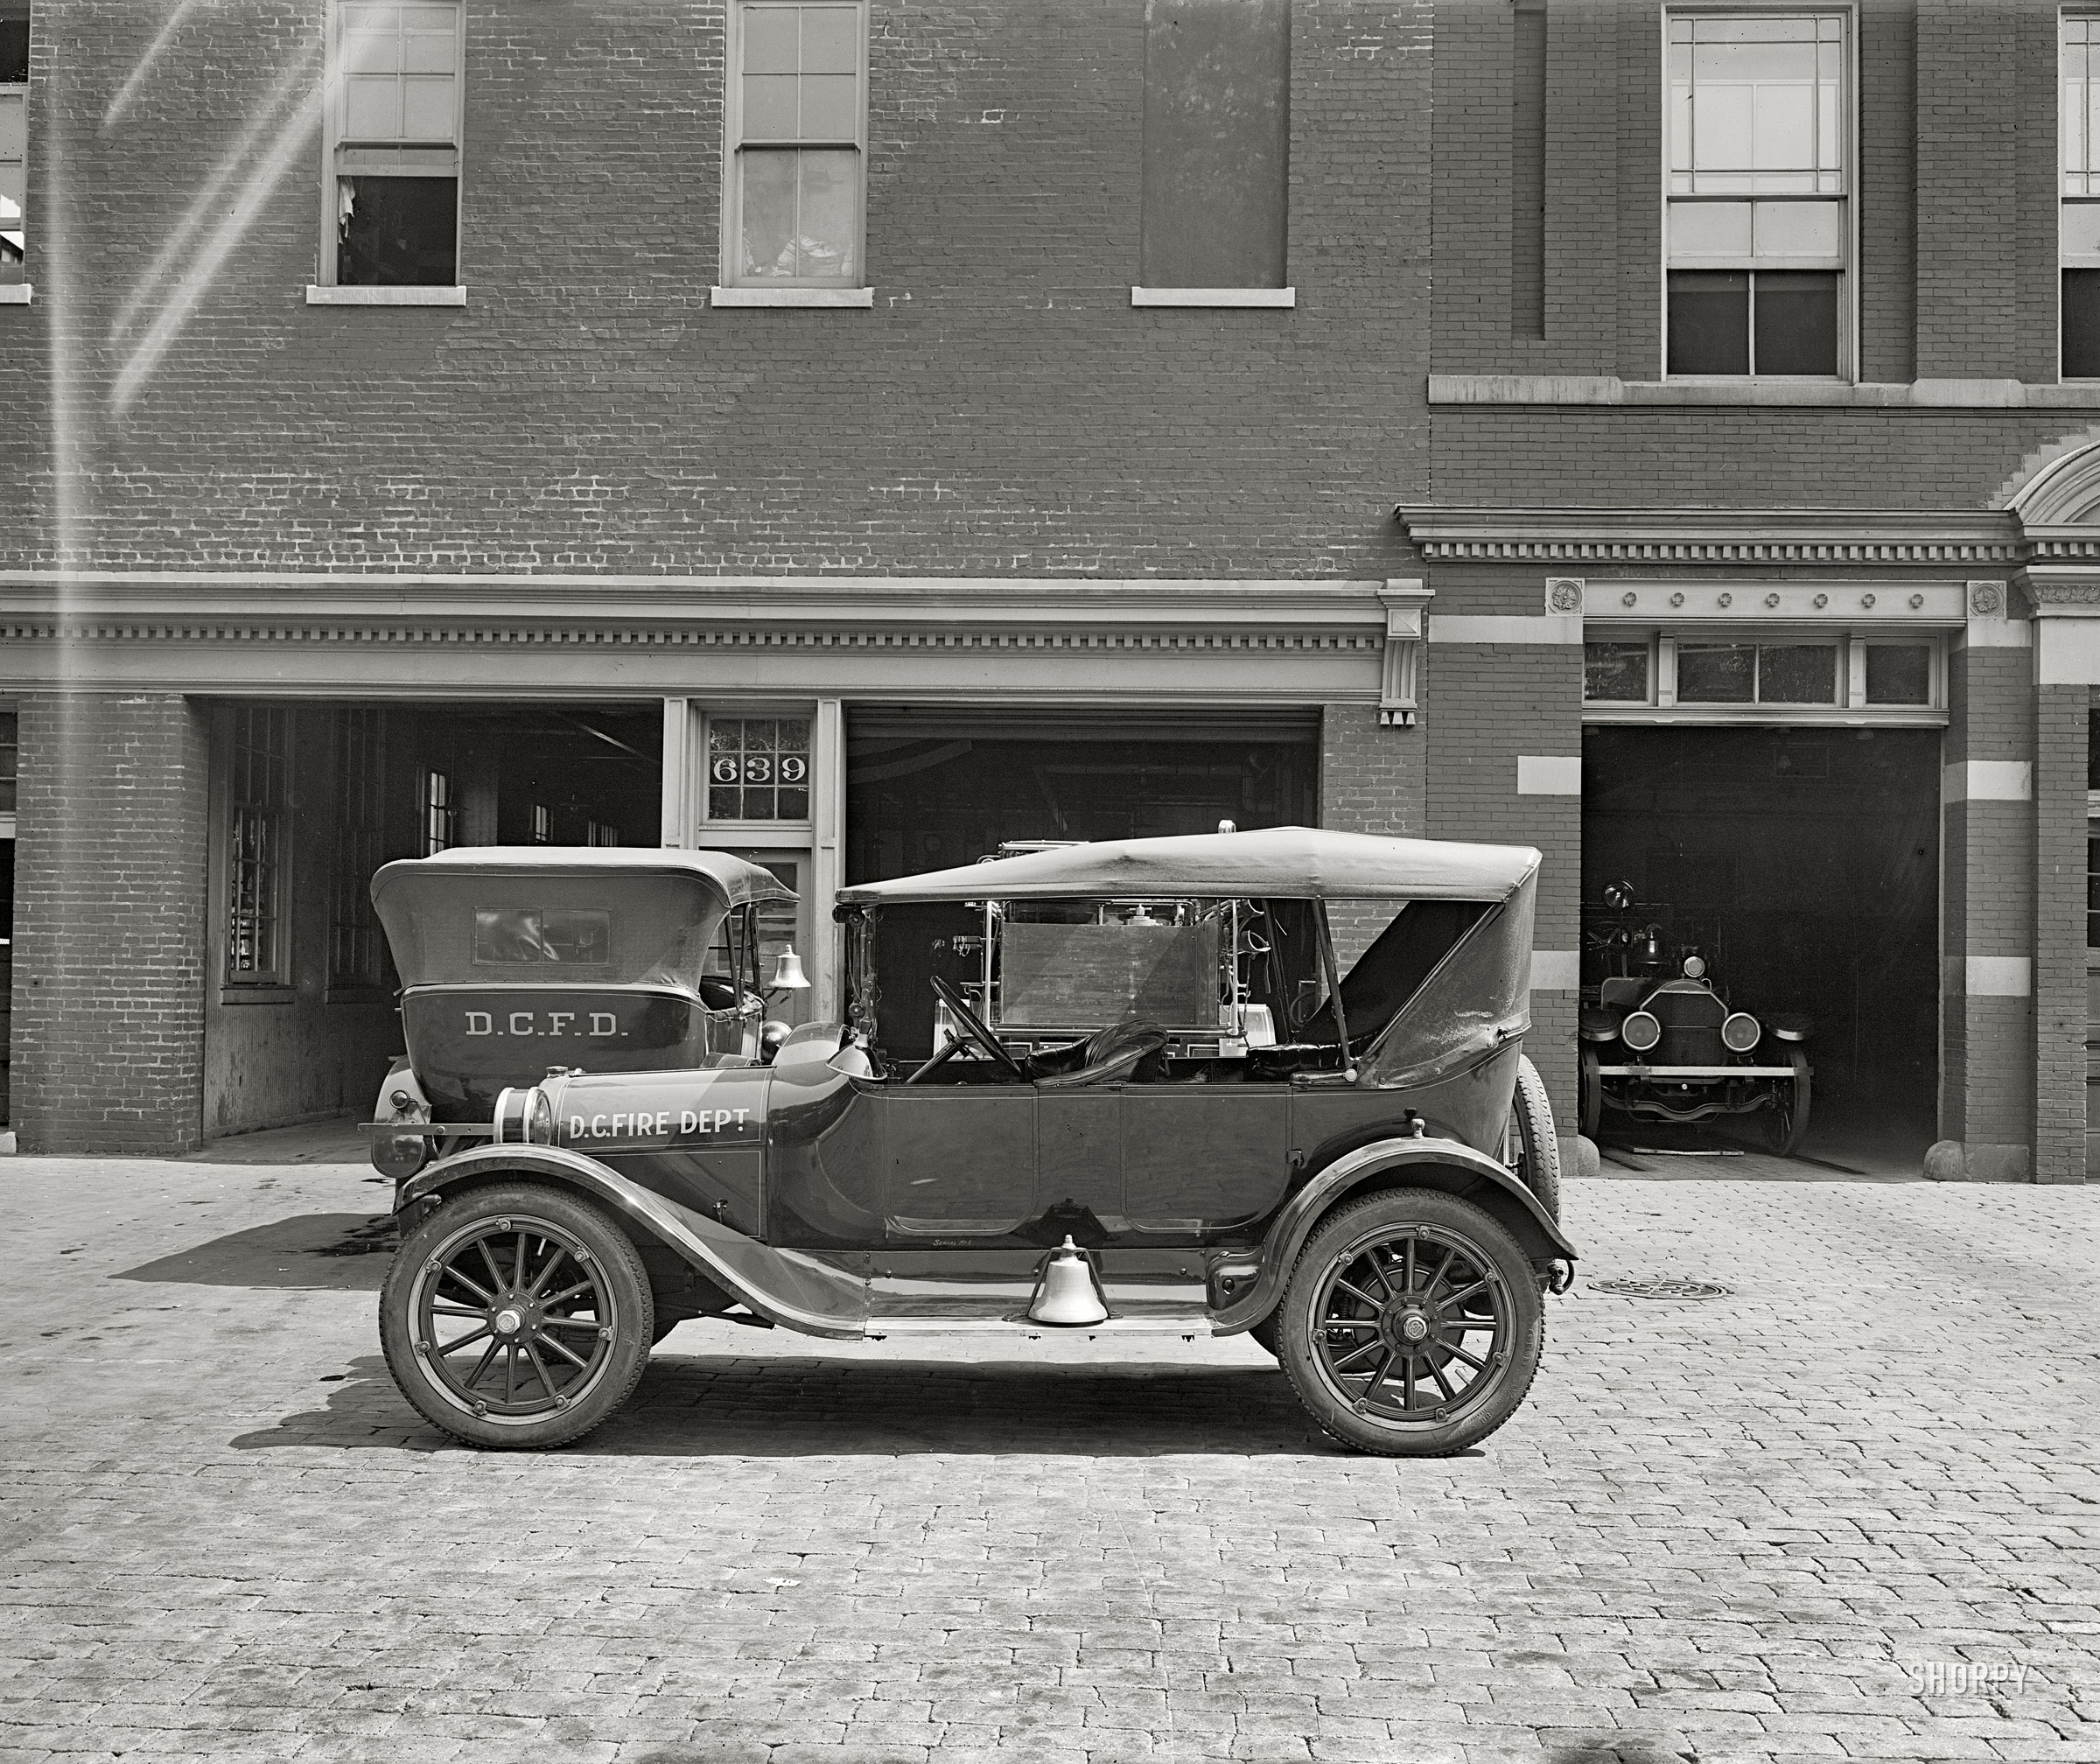 Washington, D.C., circa 1922. "D.C. Fire Dept. car for Semmes Motor Co." National Photo Company Collection glass negative. View full size.